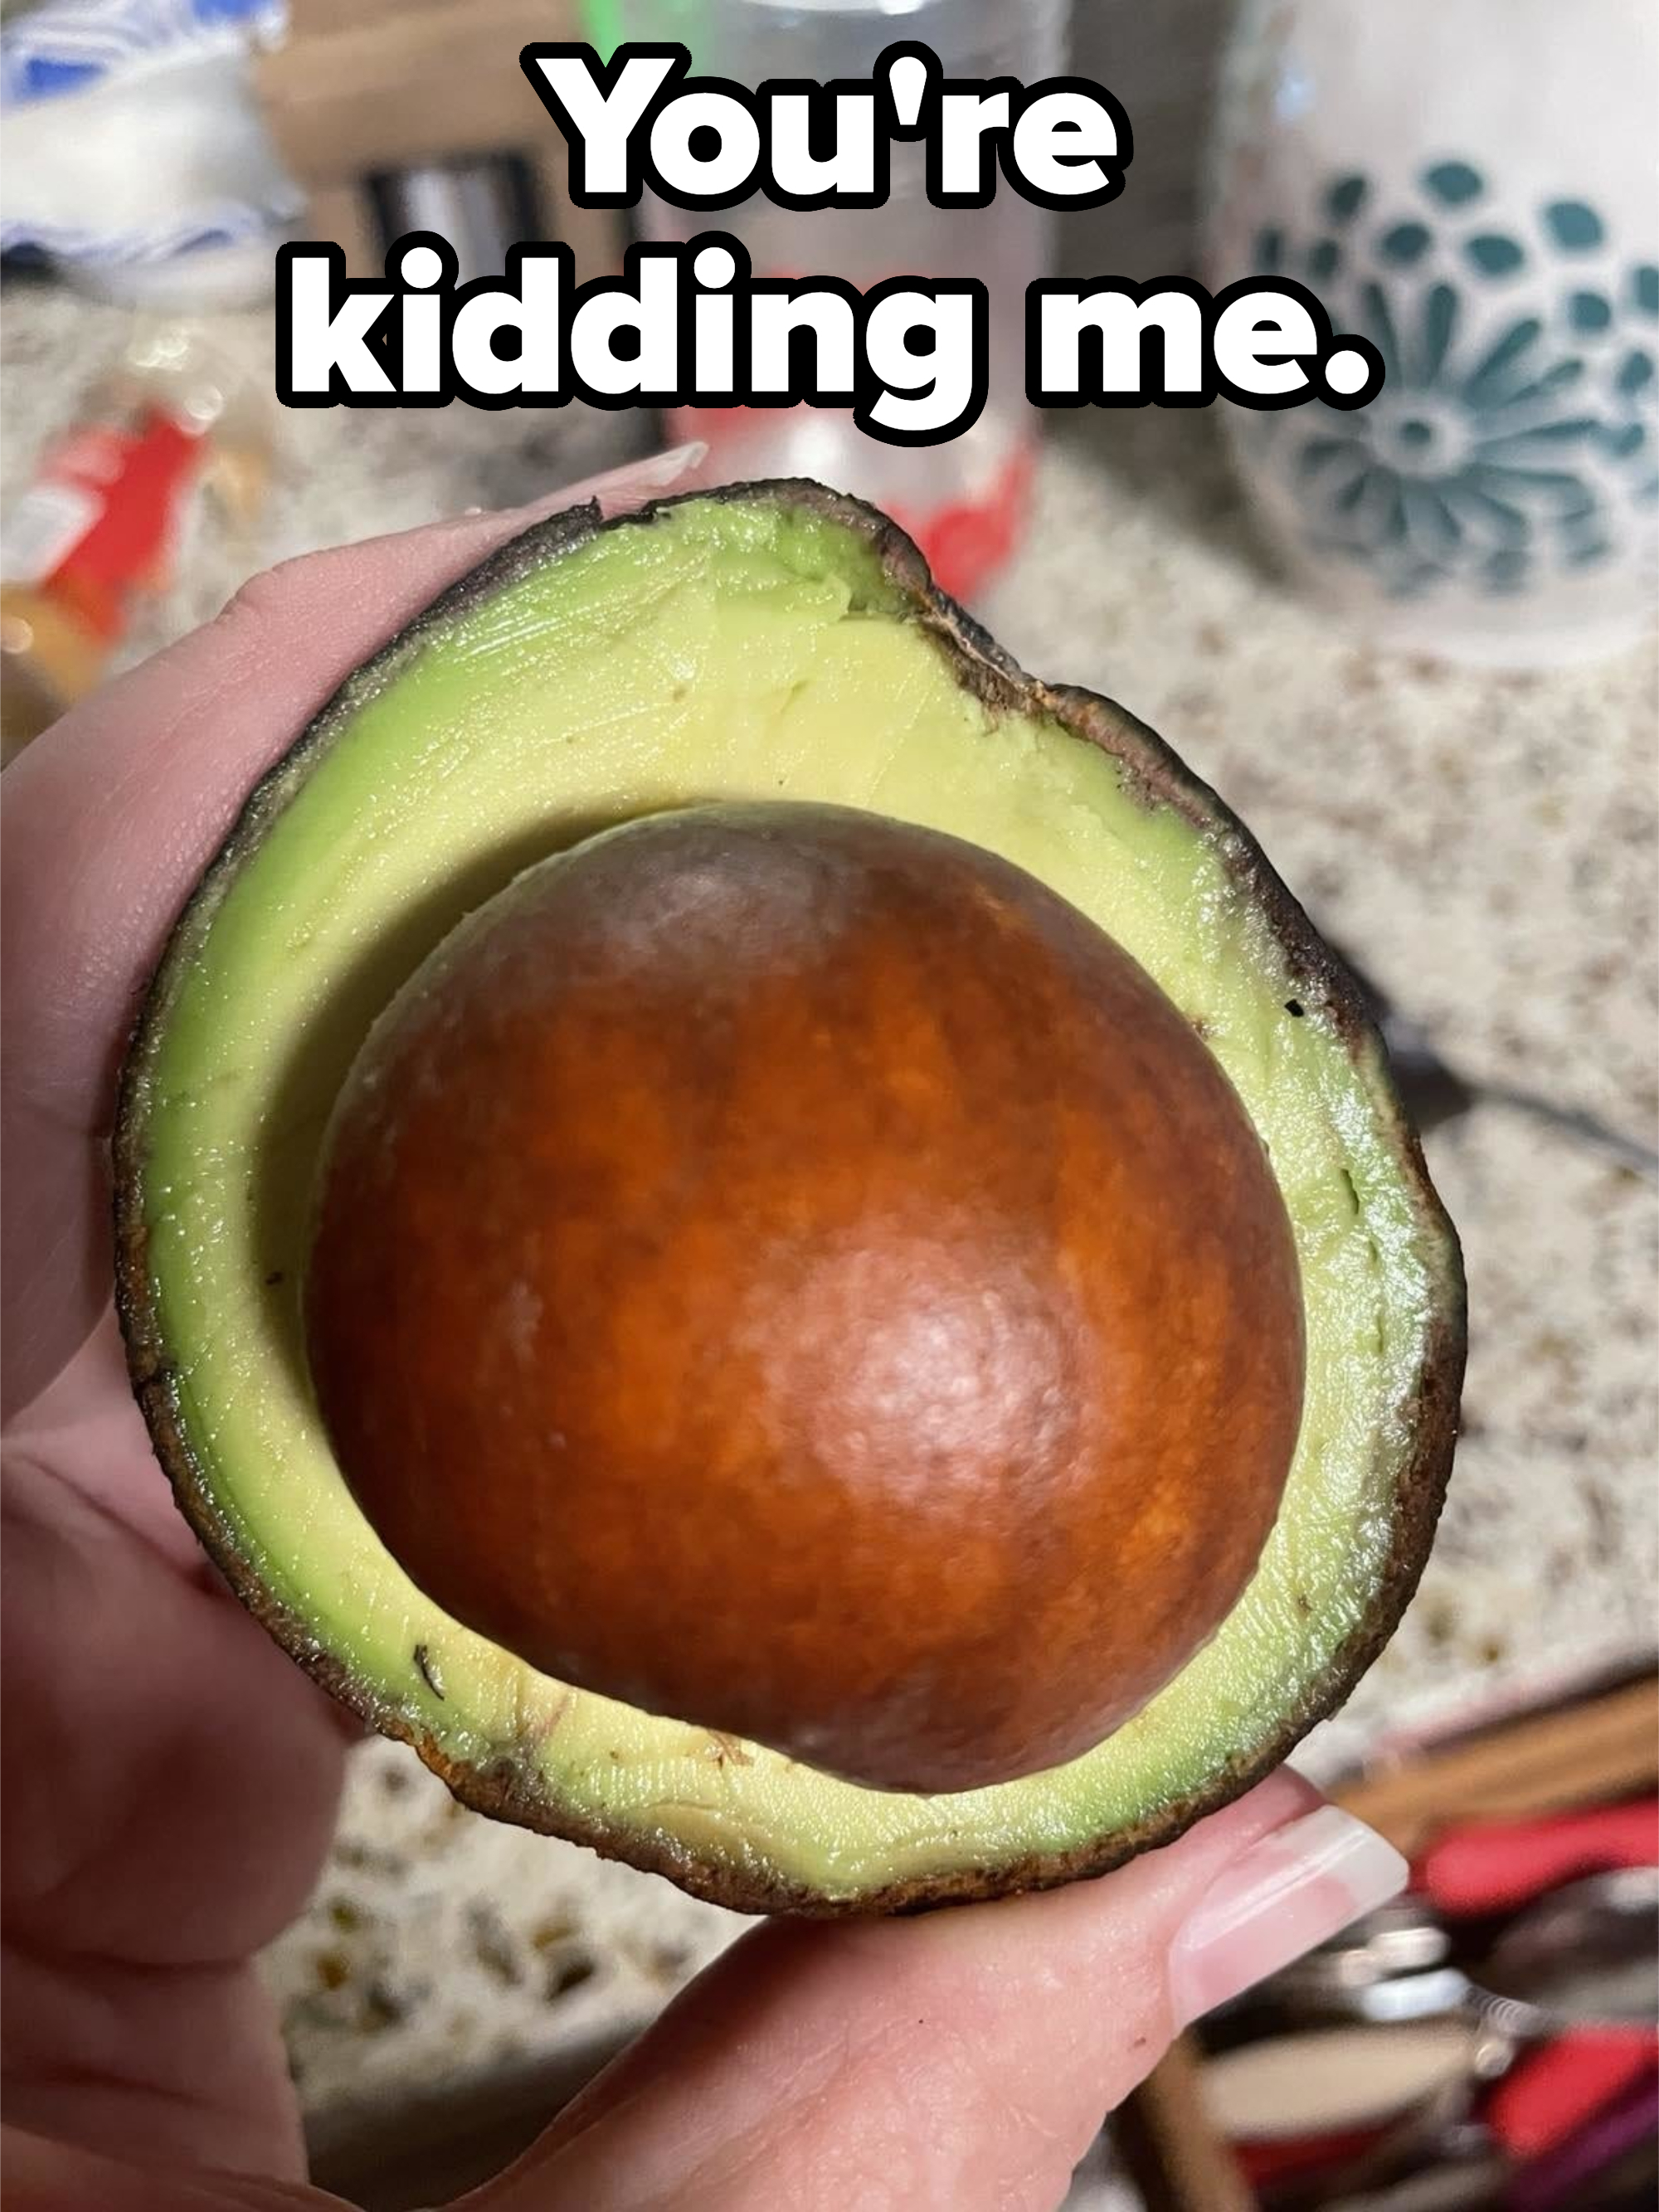 Person holding a ripe avocado cut in half, showcasing the seed and green flesh